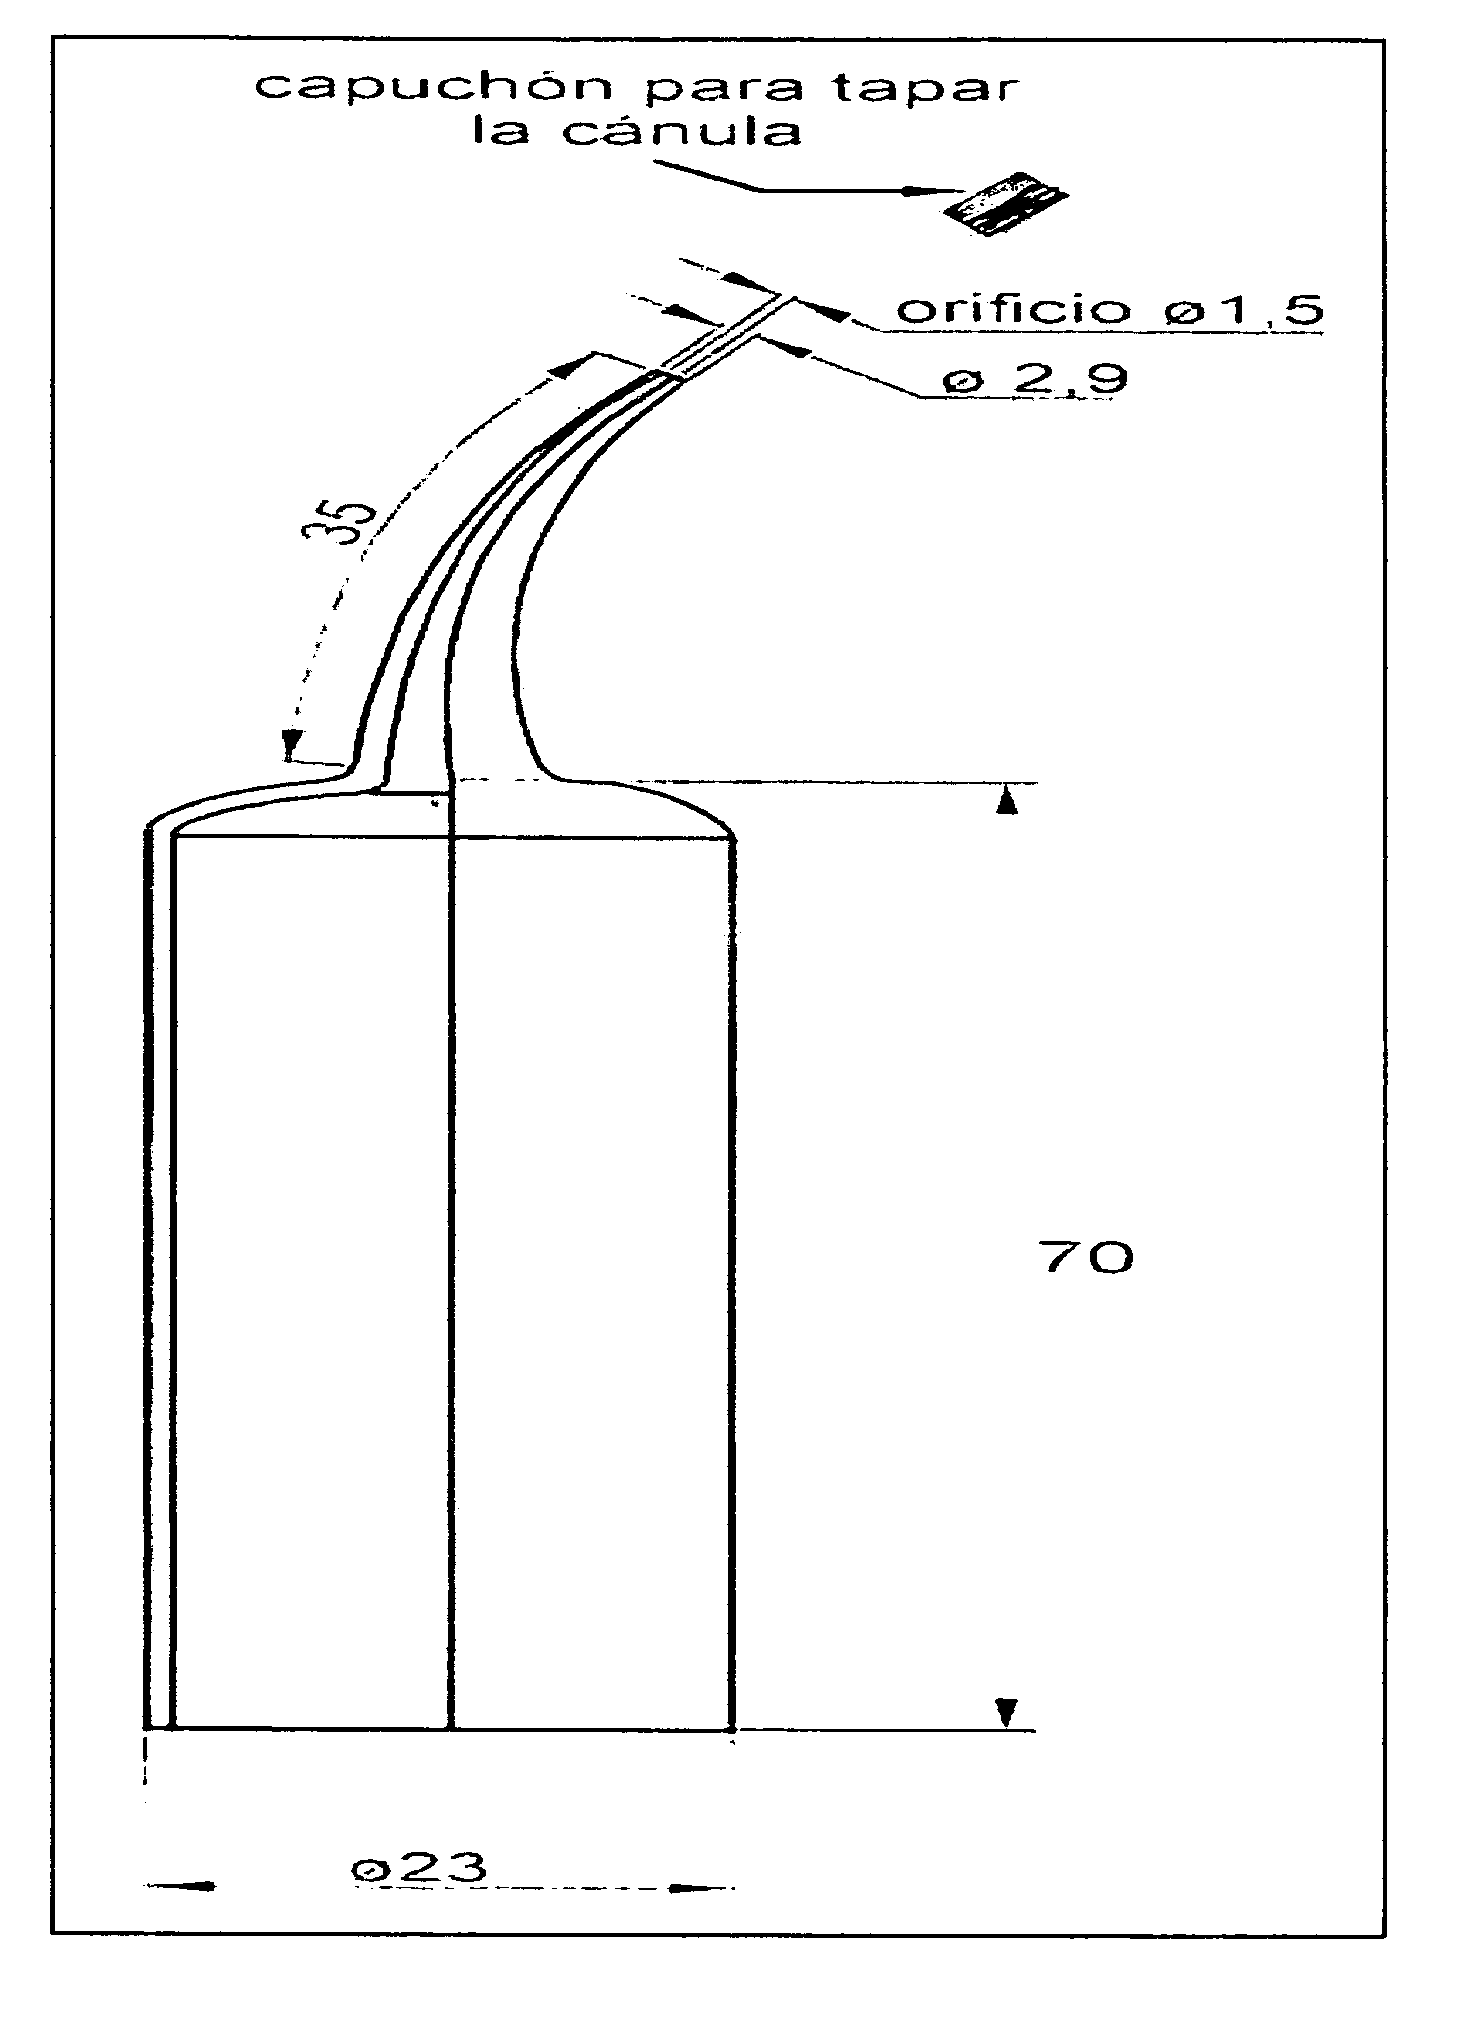 Local and residual application system for in intra-oral medications